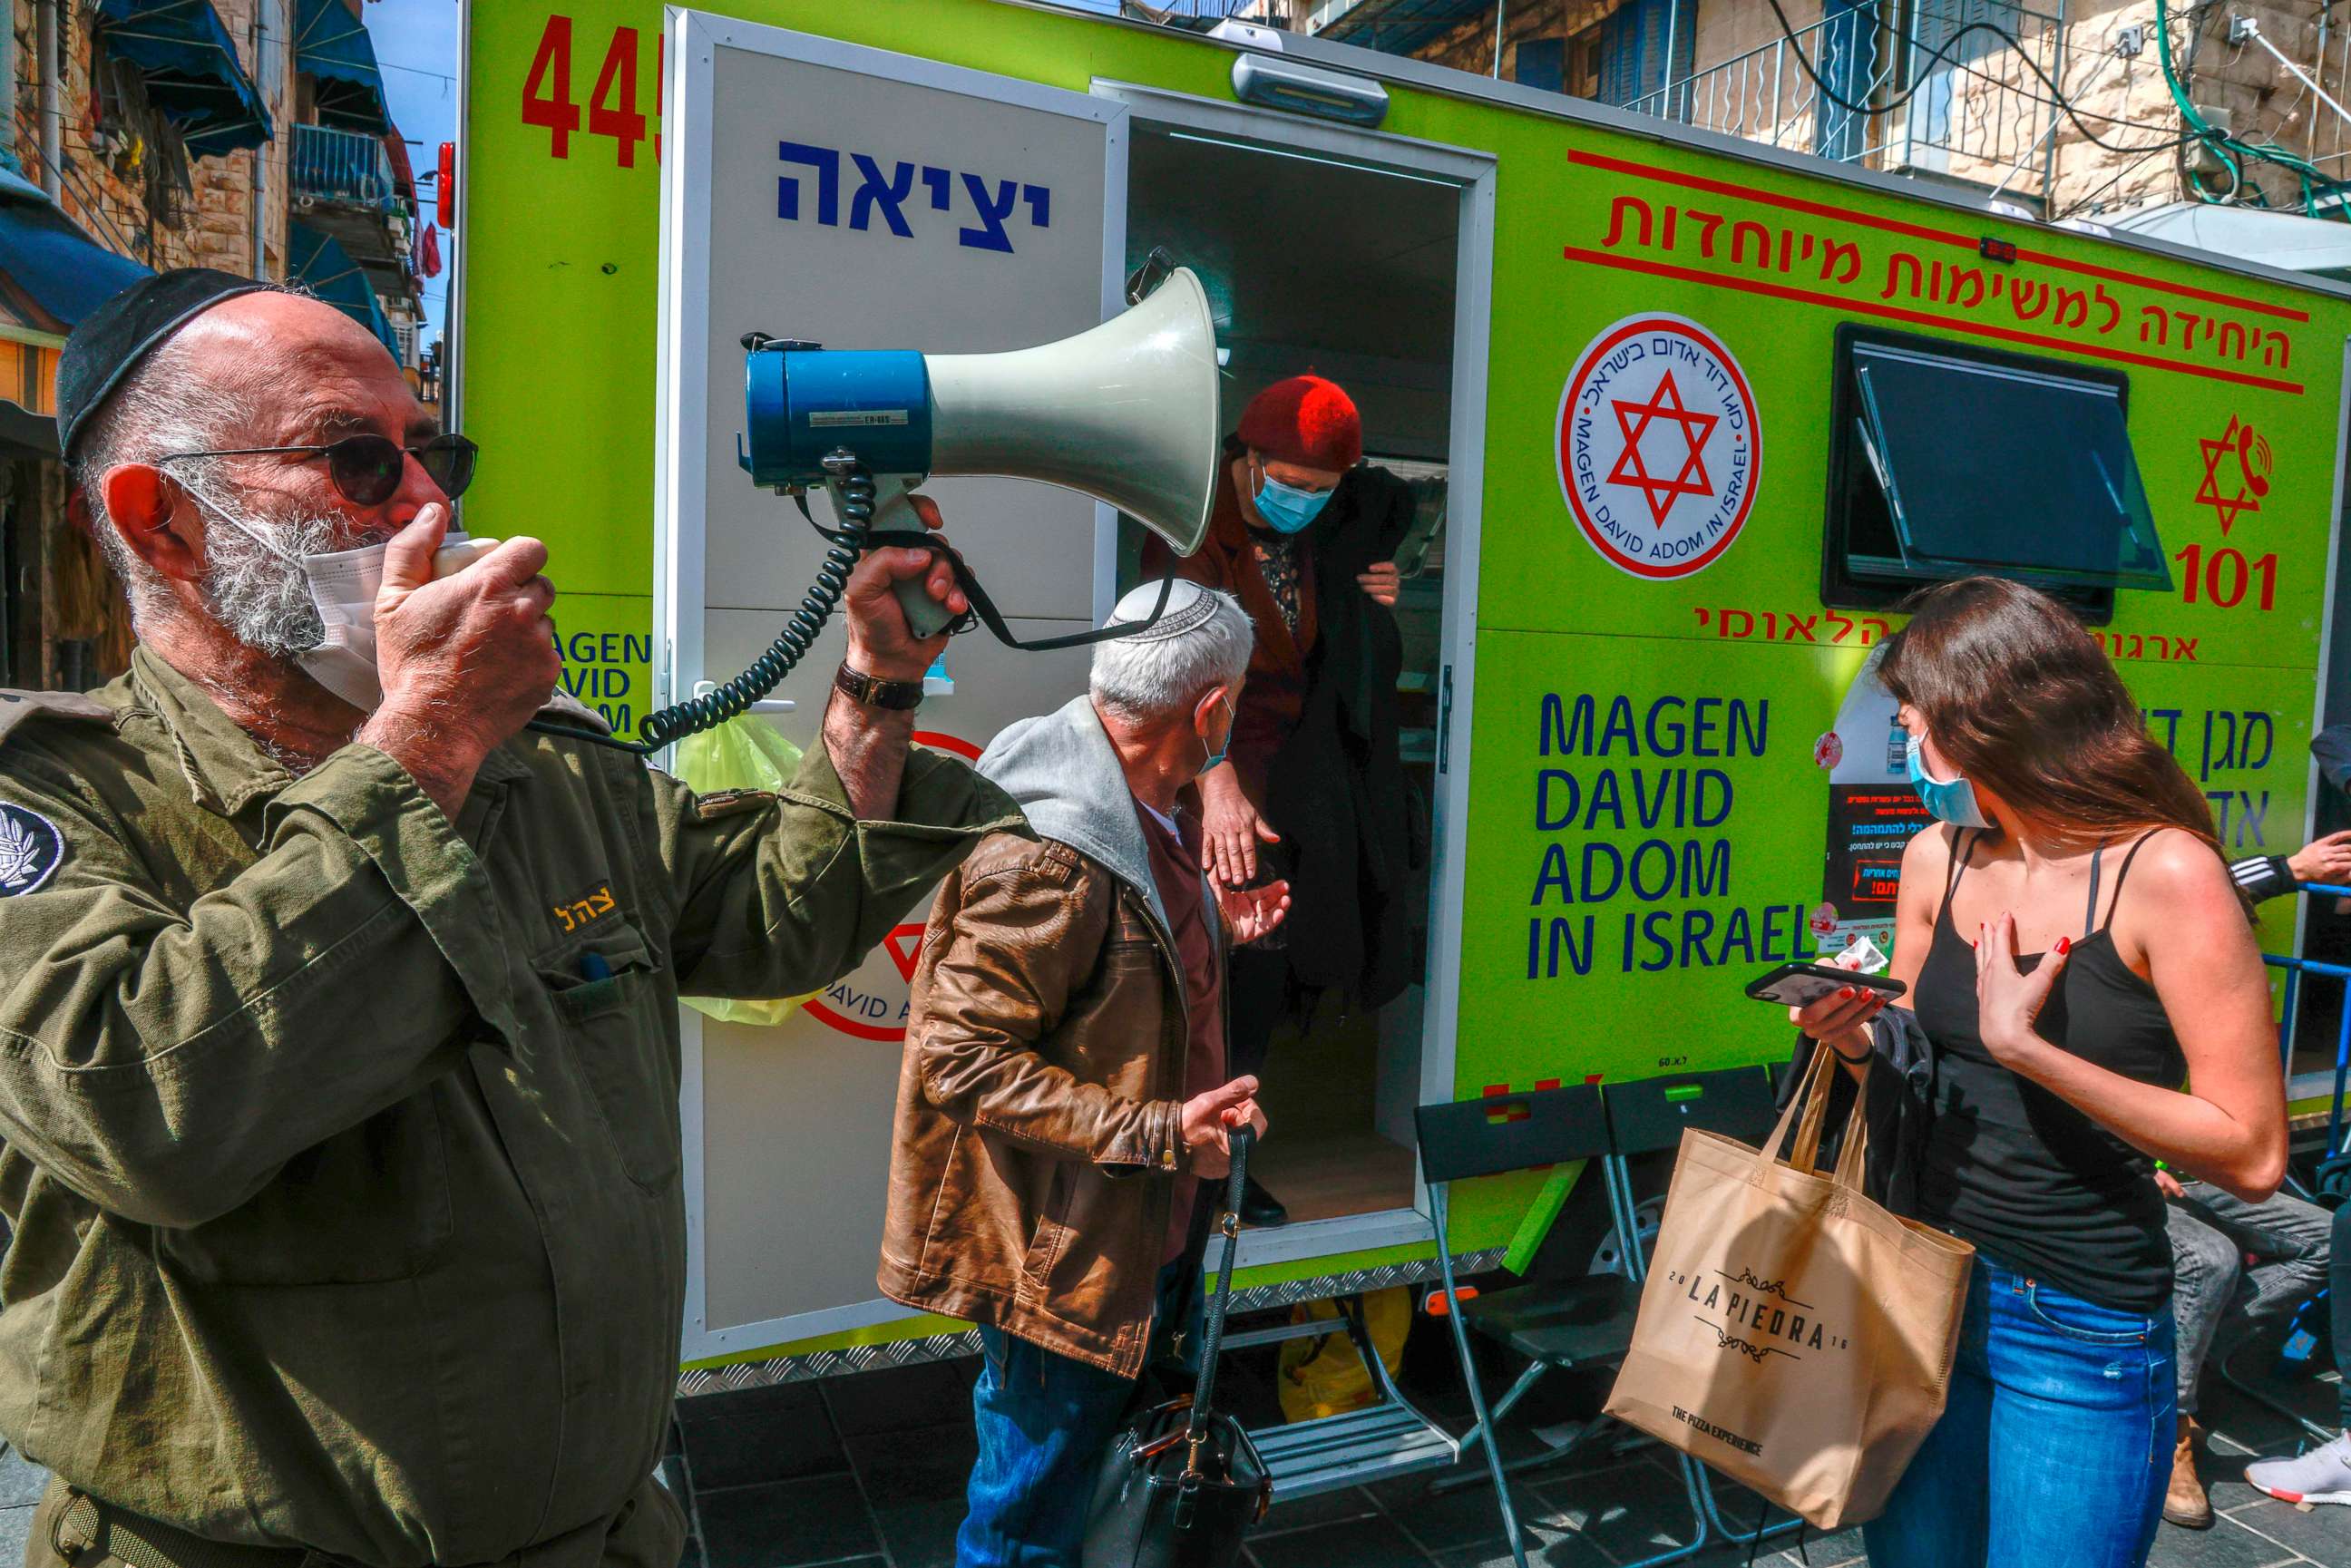 PHOTO: An officer of Israel's Home Front Command uses a megaphone to call patients during a coronavirus vaccination campaign at the Mahane Yehuda Market in Jerusalem on Feb. 22, 2021.